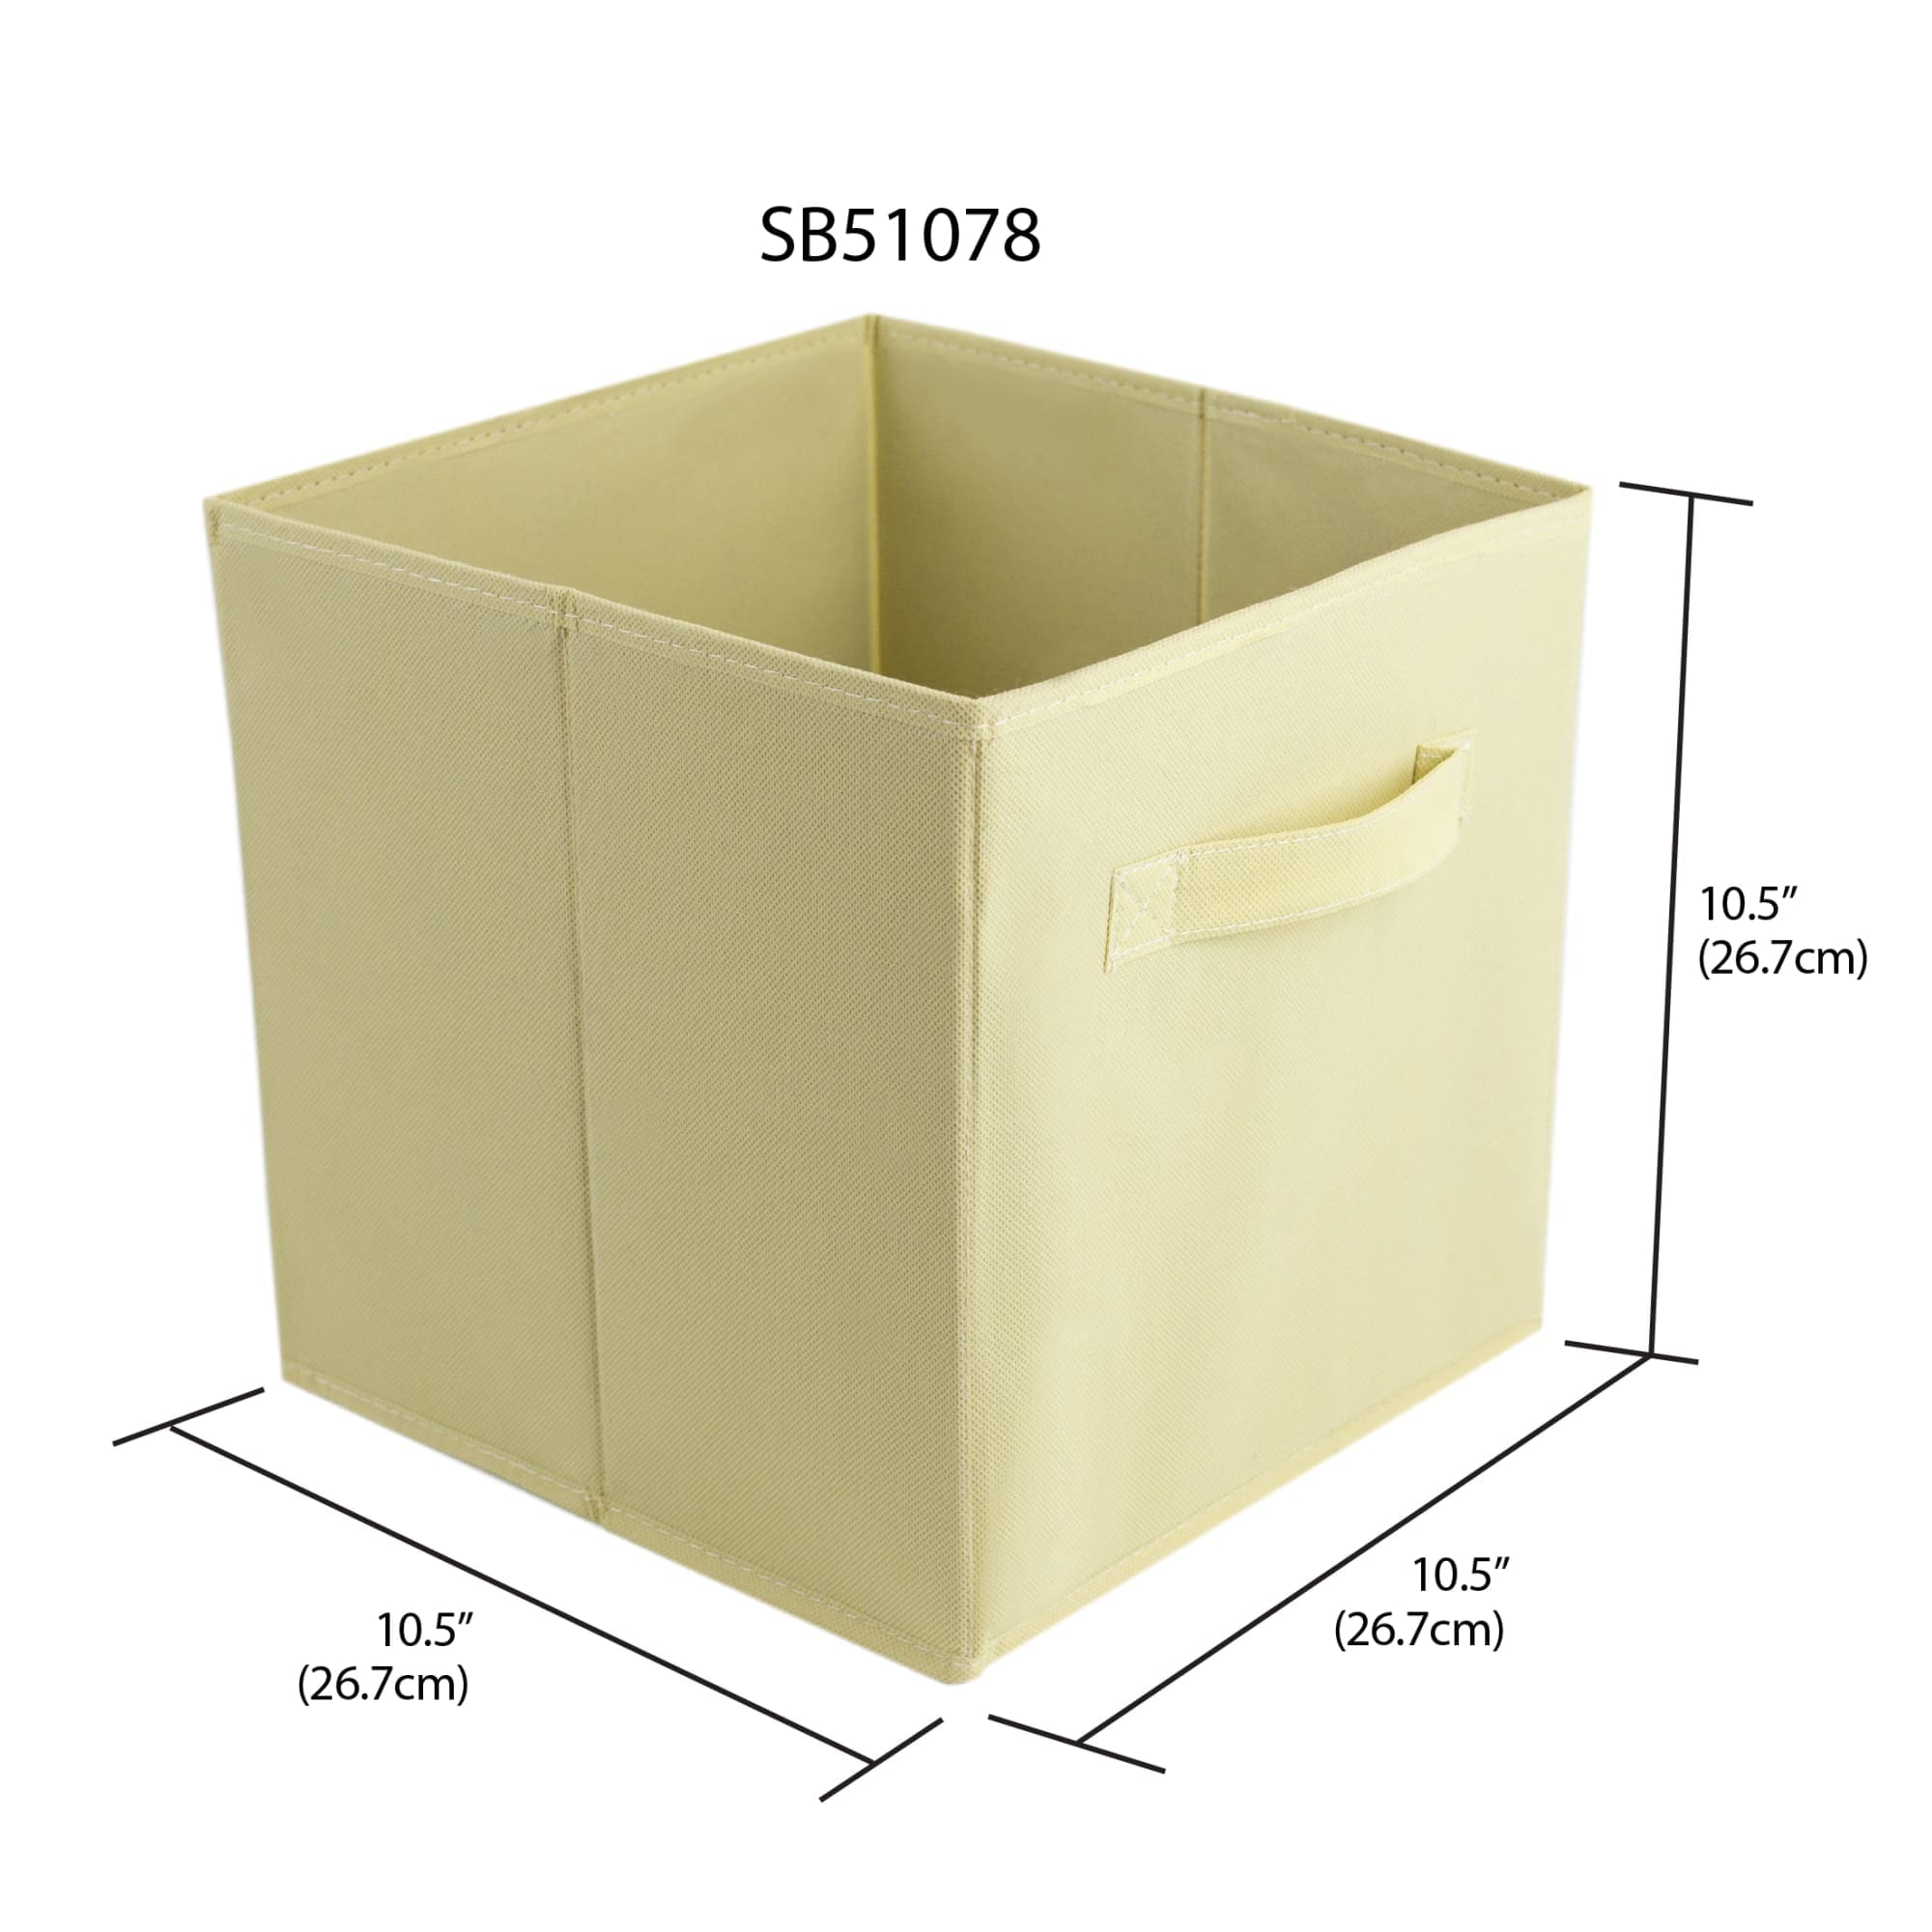 Home Basics Collapsible and Foldable Non-Woven Storage Cube, Khaki $3.00 EACH, CASE PACK OF 12